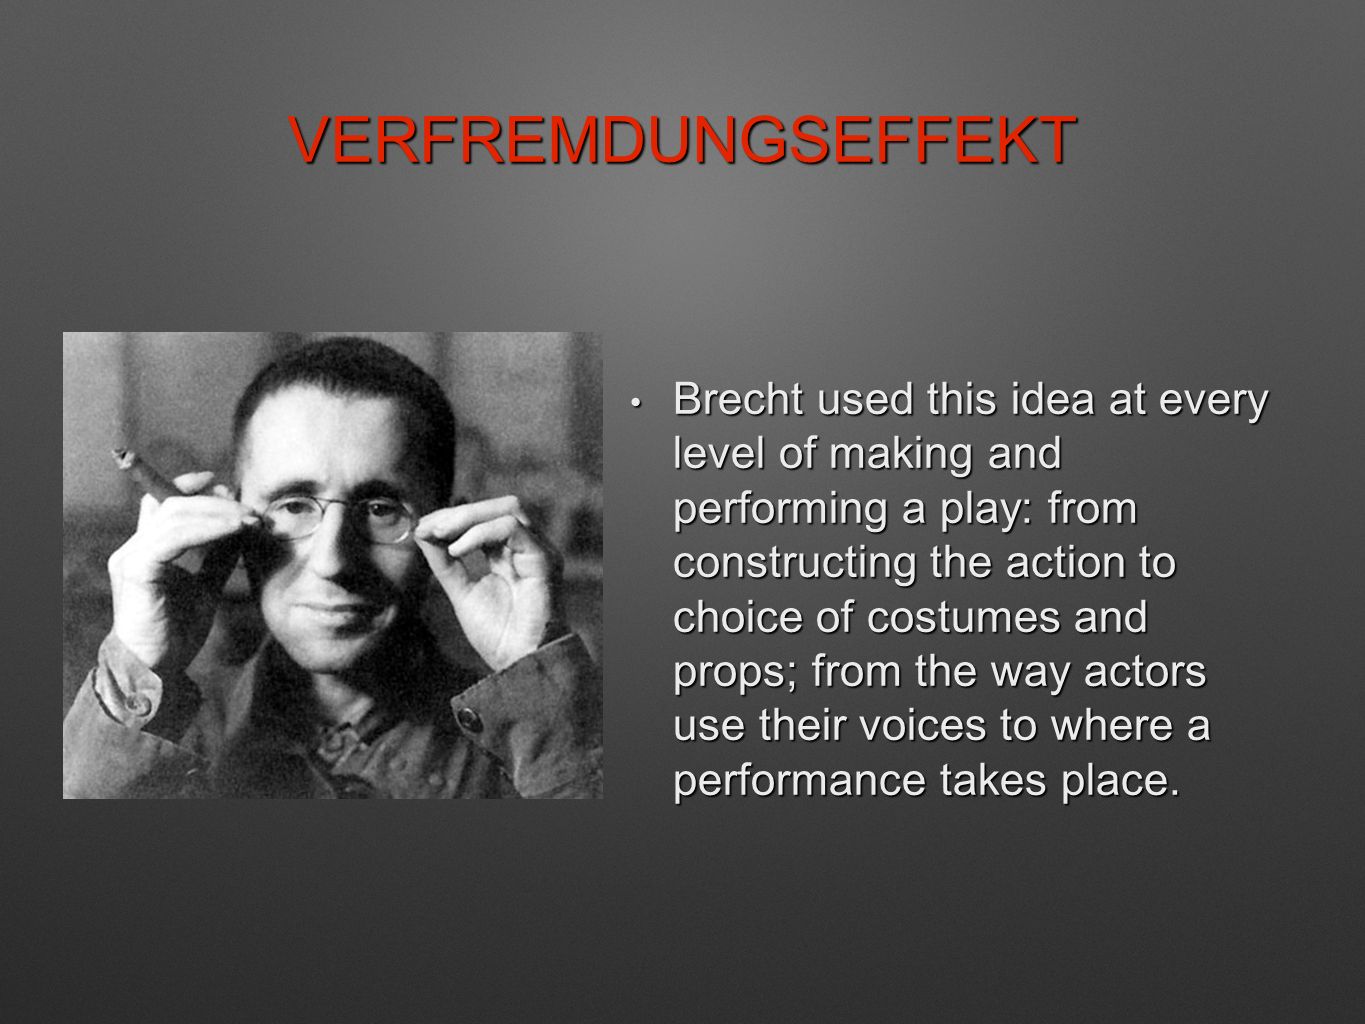 VERFREMDUNGSEFFEKT Brecht used this idea at every level of making and performing a play: from constructing the action to choice of costumes and props; from the way actors use their voices to where a performance takes place.